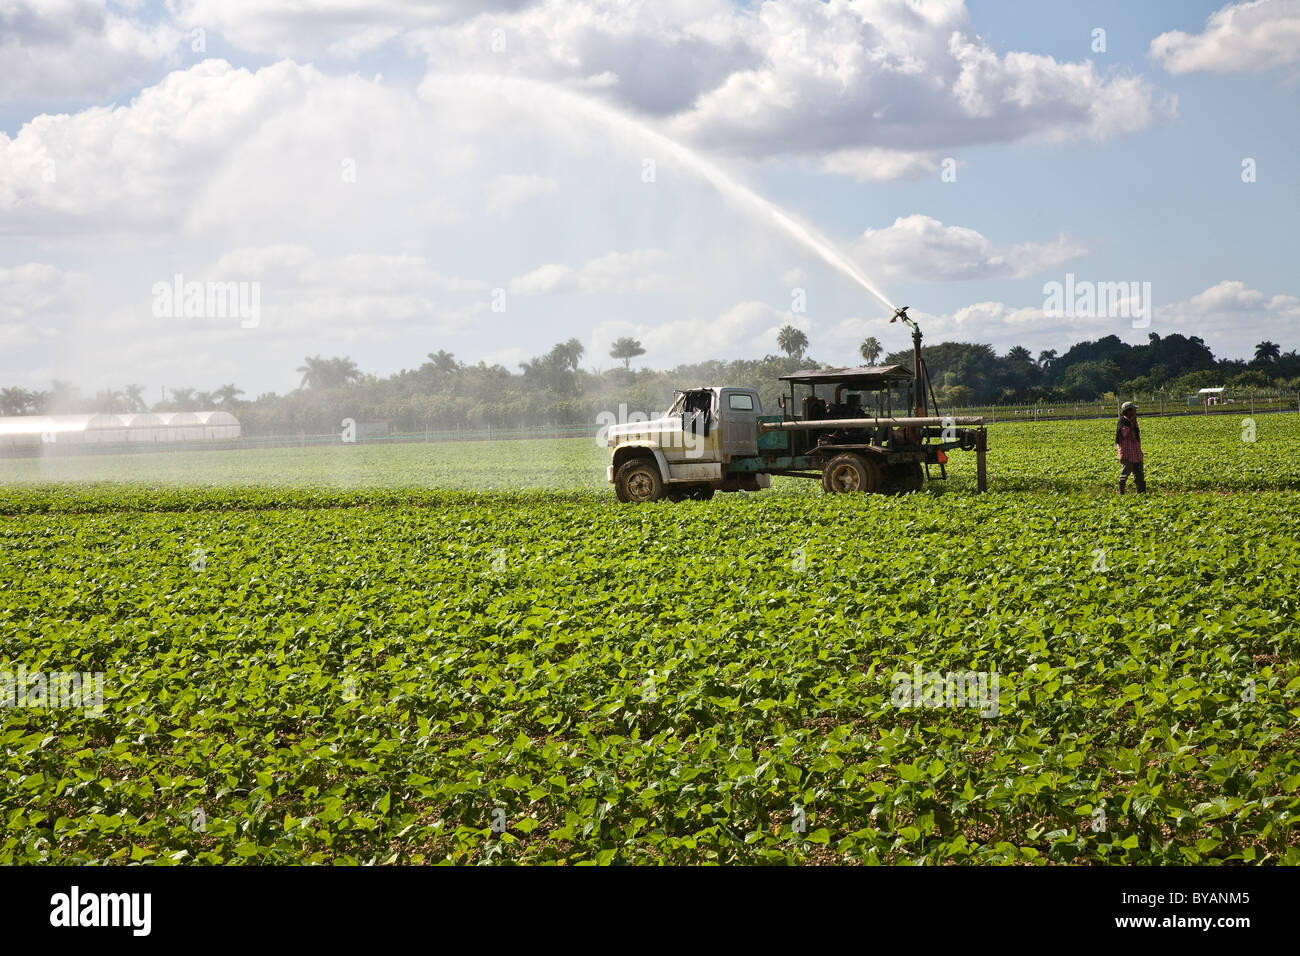 Agricultural and Rural Development Zone between Homestead and the main entrance to Everglades National Park, Florida, USA Stock Photo